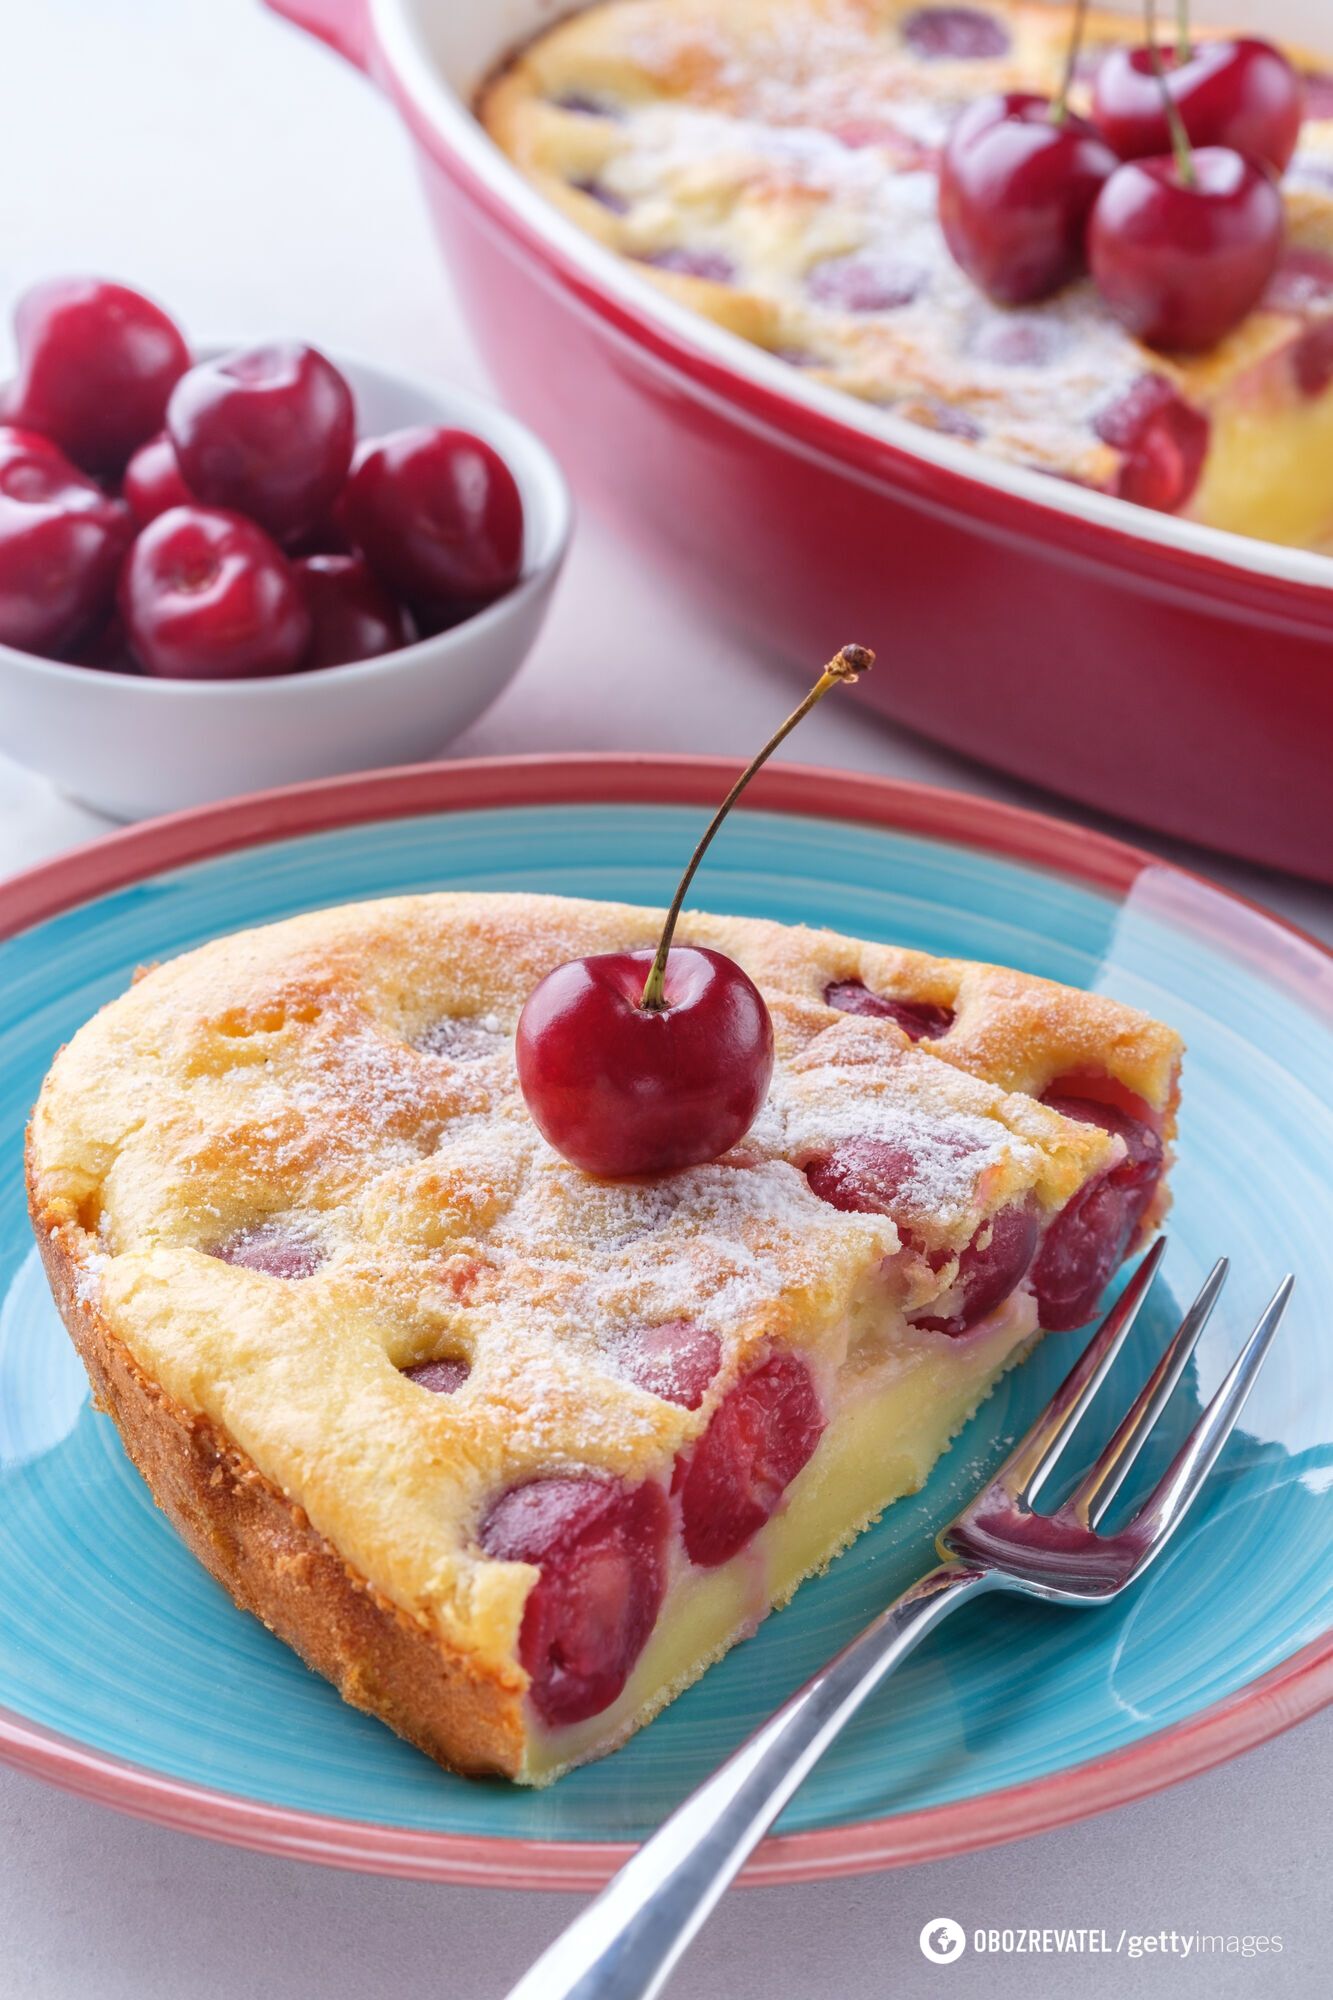 How to cook clafoutis